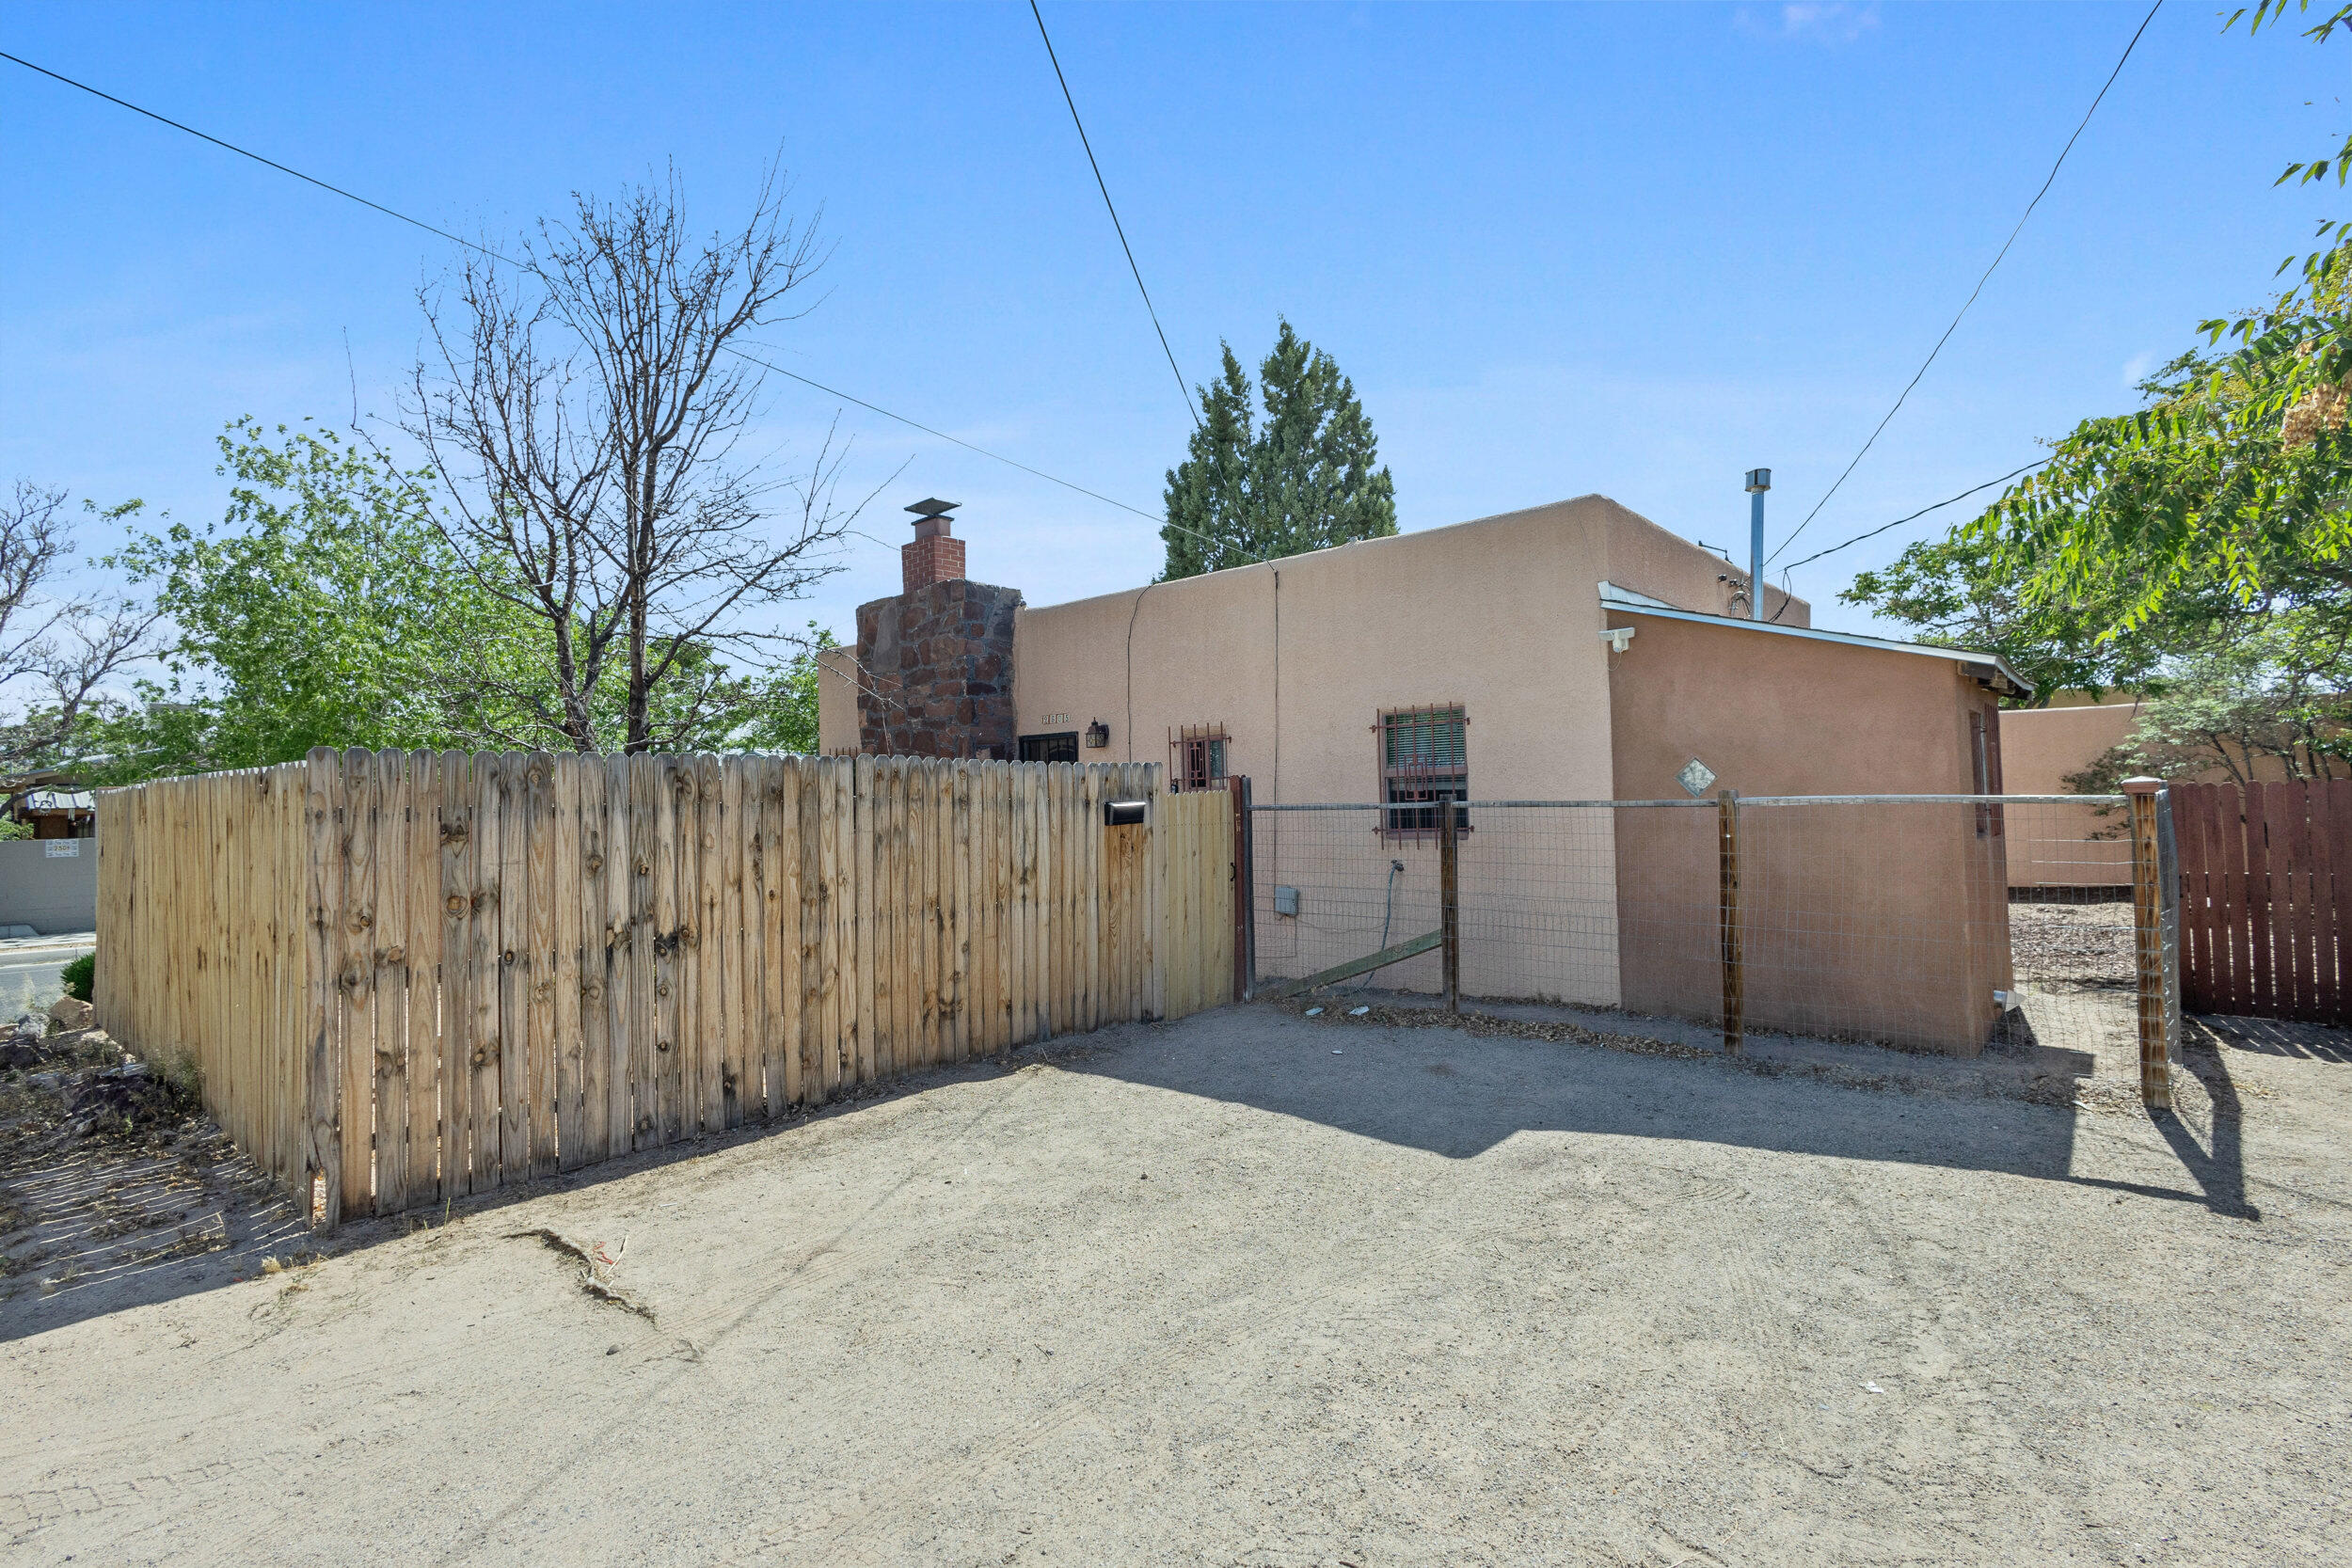 Charming 2 Bedroom/ 1 Bathroom, with fireplace 3 blks from UNM, adjacent to Nob Hill, easy access to Downtown/Uptown/Airport/Kirtland AFB/Sandia Labs. Hardwood floors.  Off street parking for 2 cars. Fenced and walled backyard for privacy.